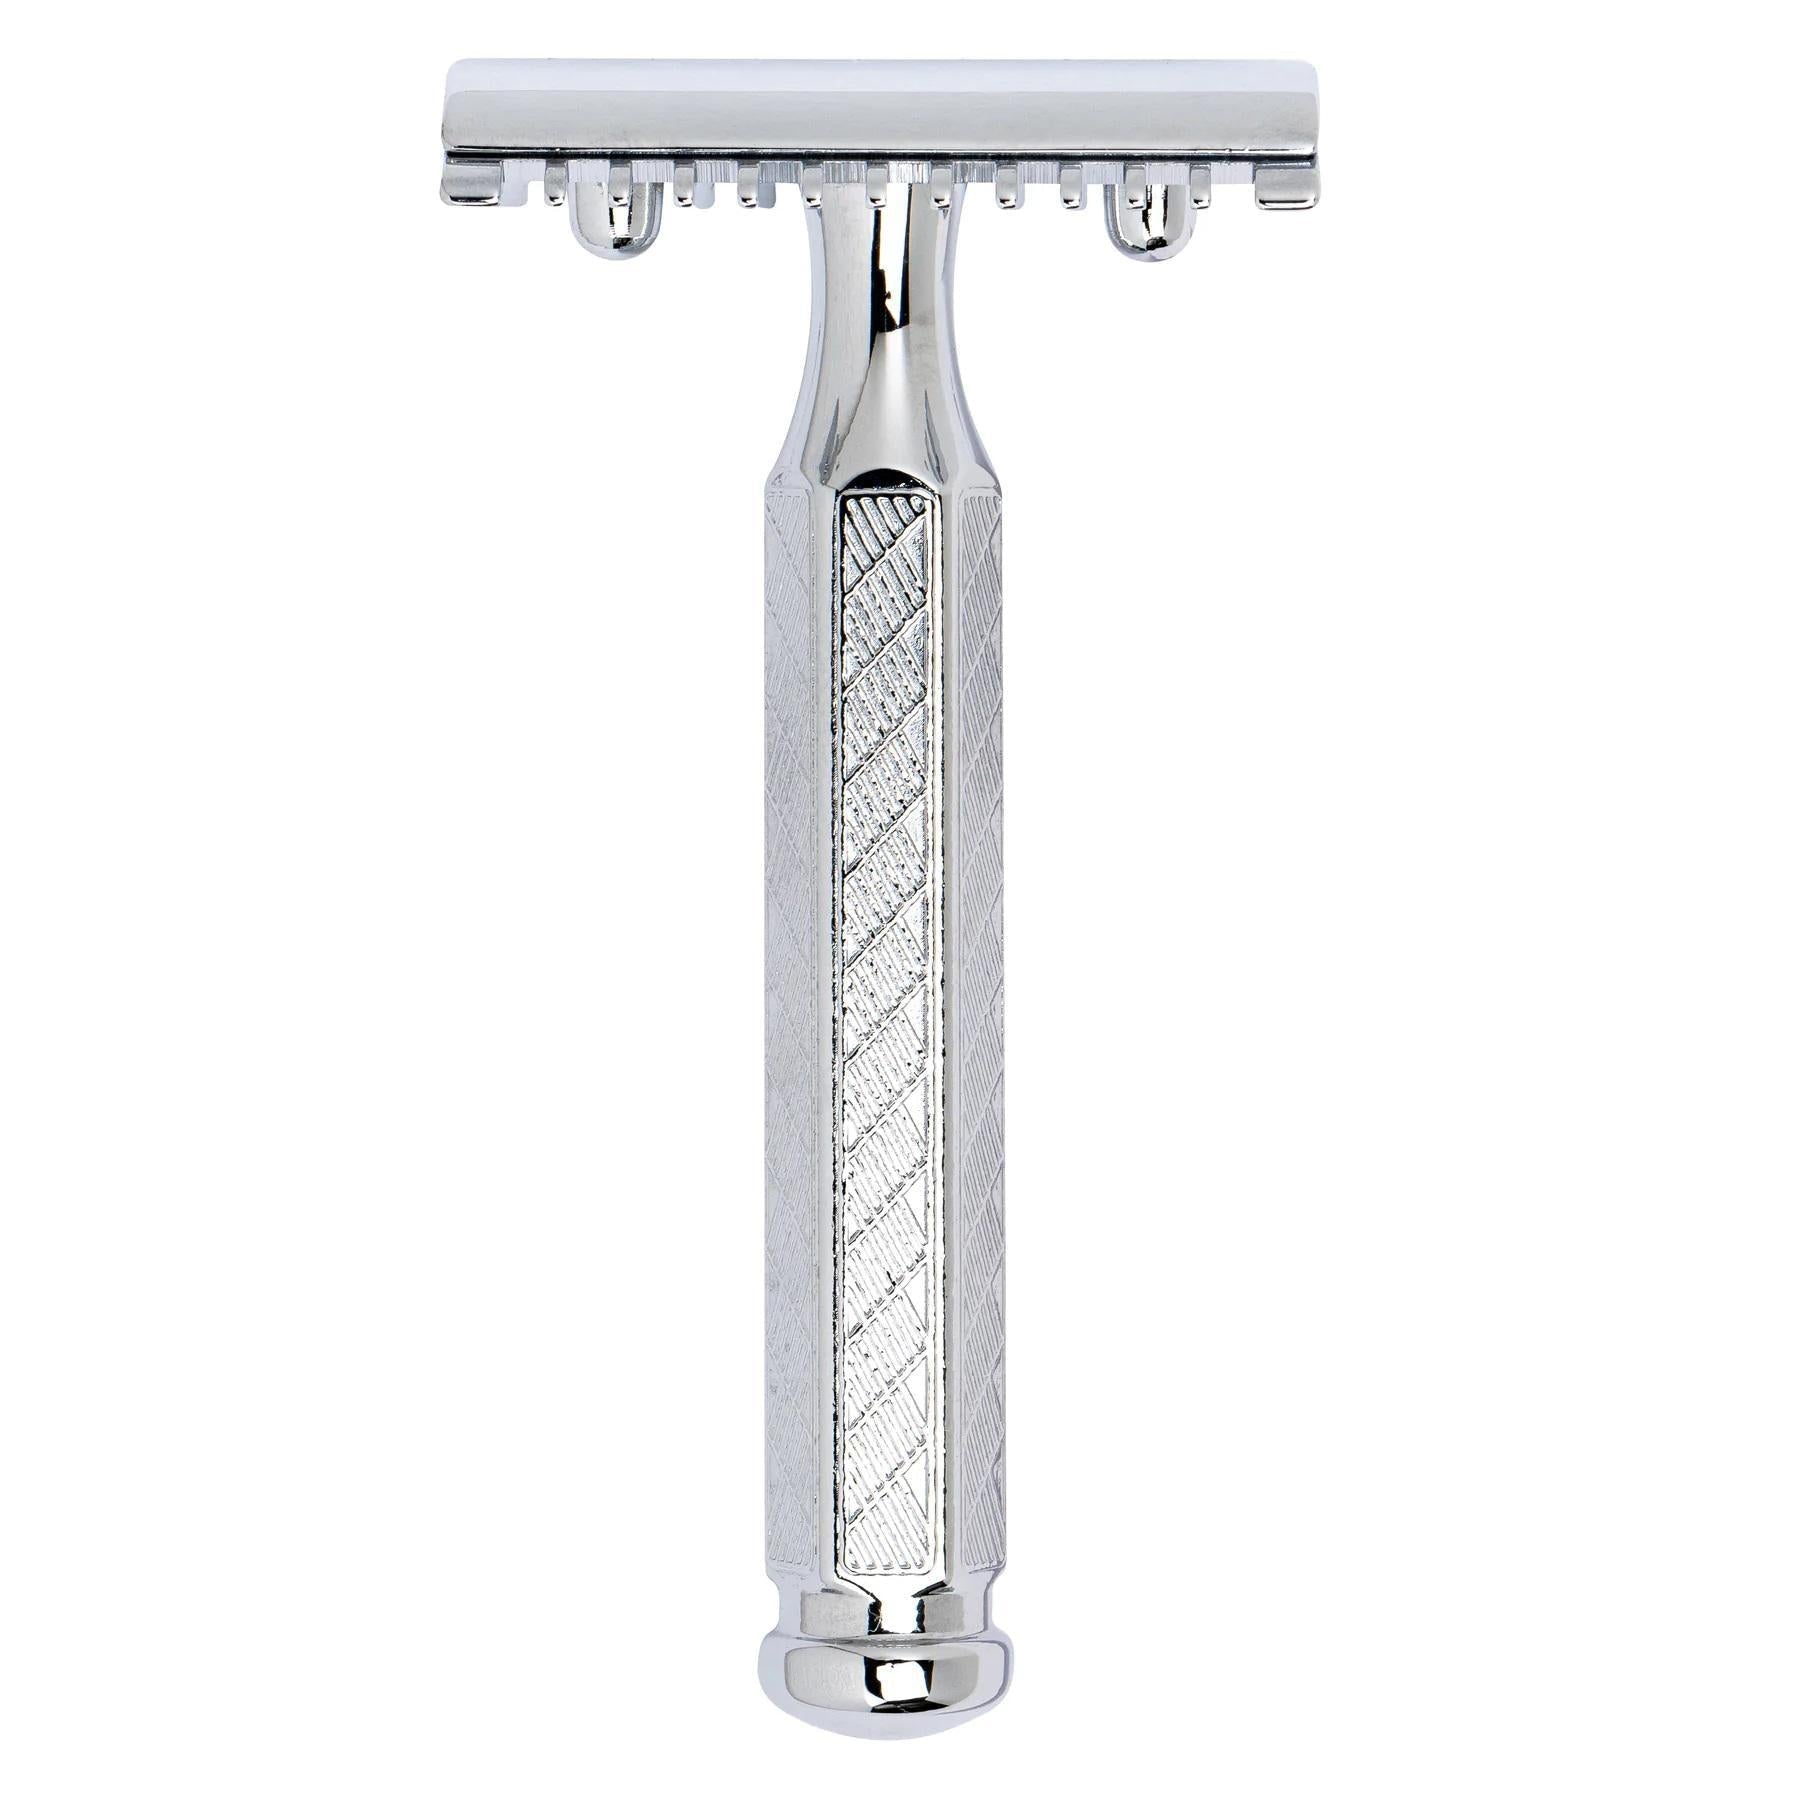 Merkur Double Edge Safety Razor | Straight Cut, Open Comb, Chrome-Plated, Etched Handle 41C